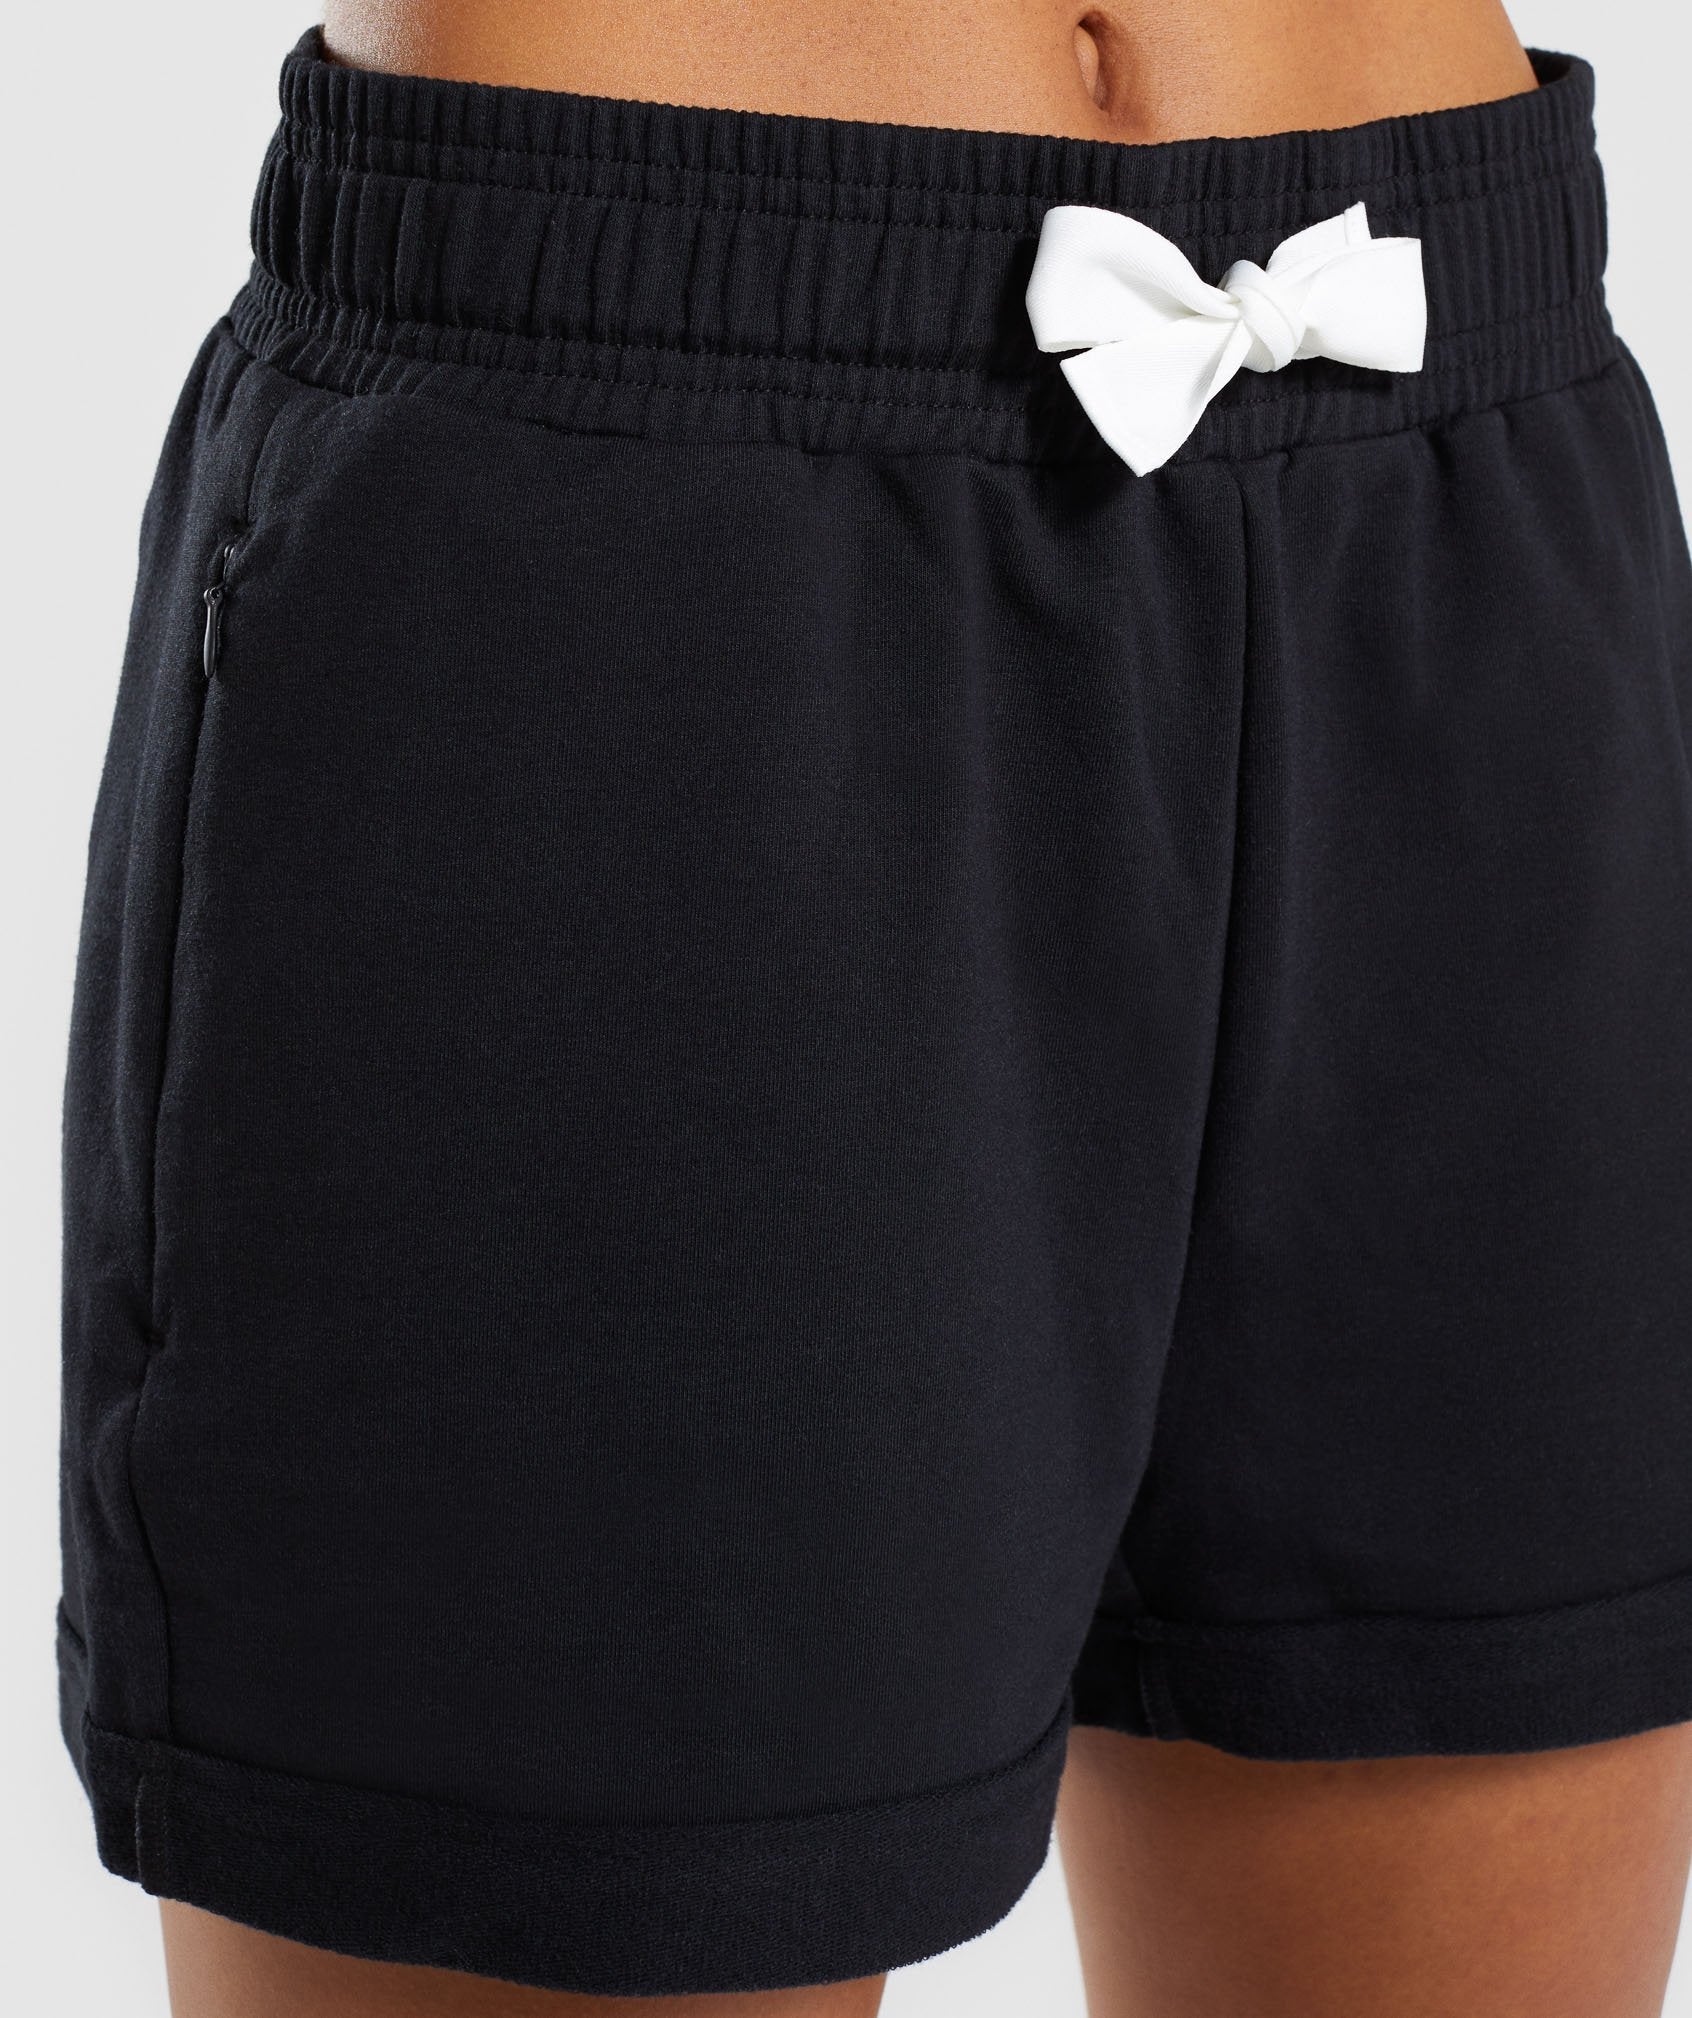 Ark High Waisted Shorts in Black - view 6